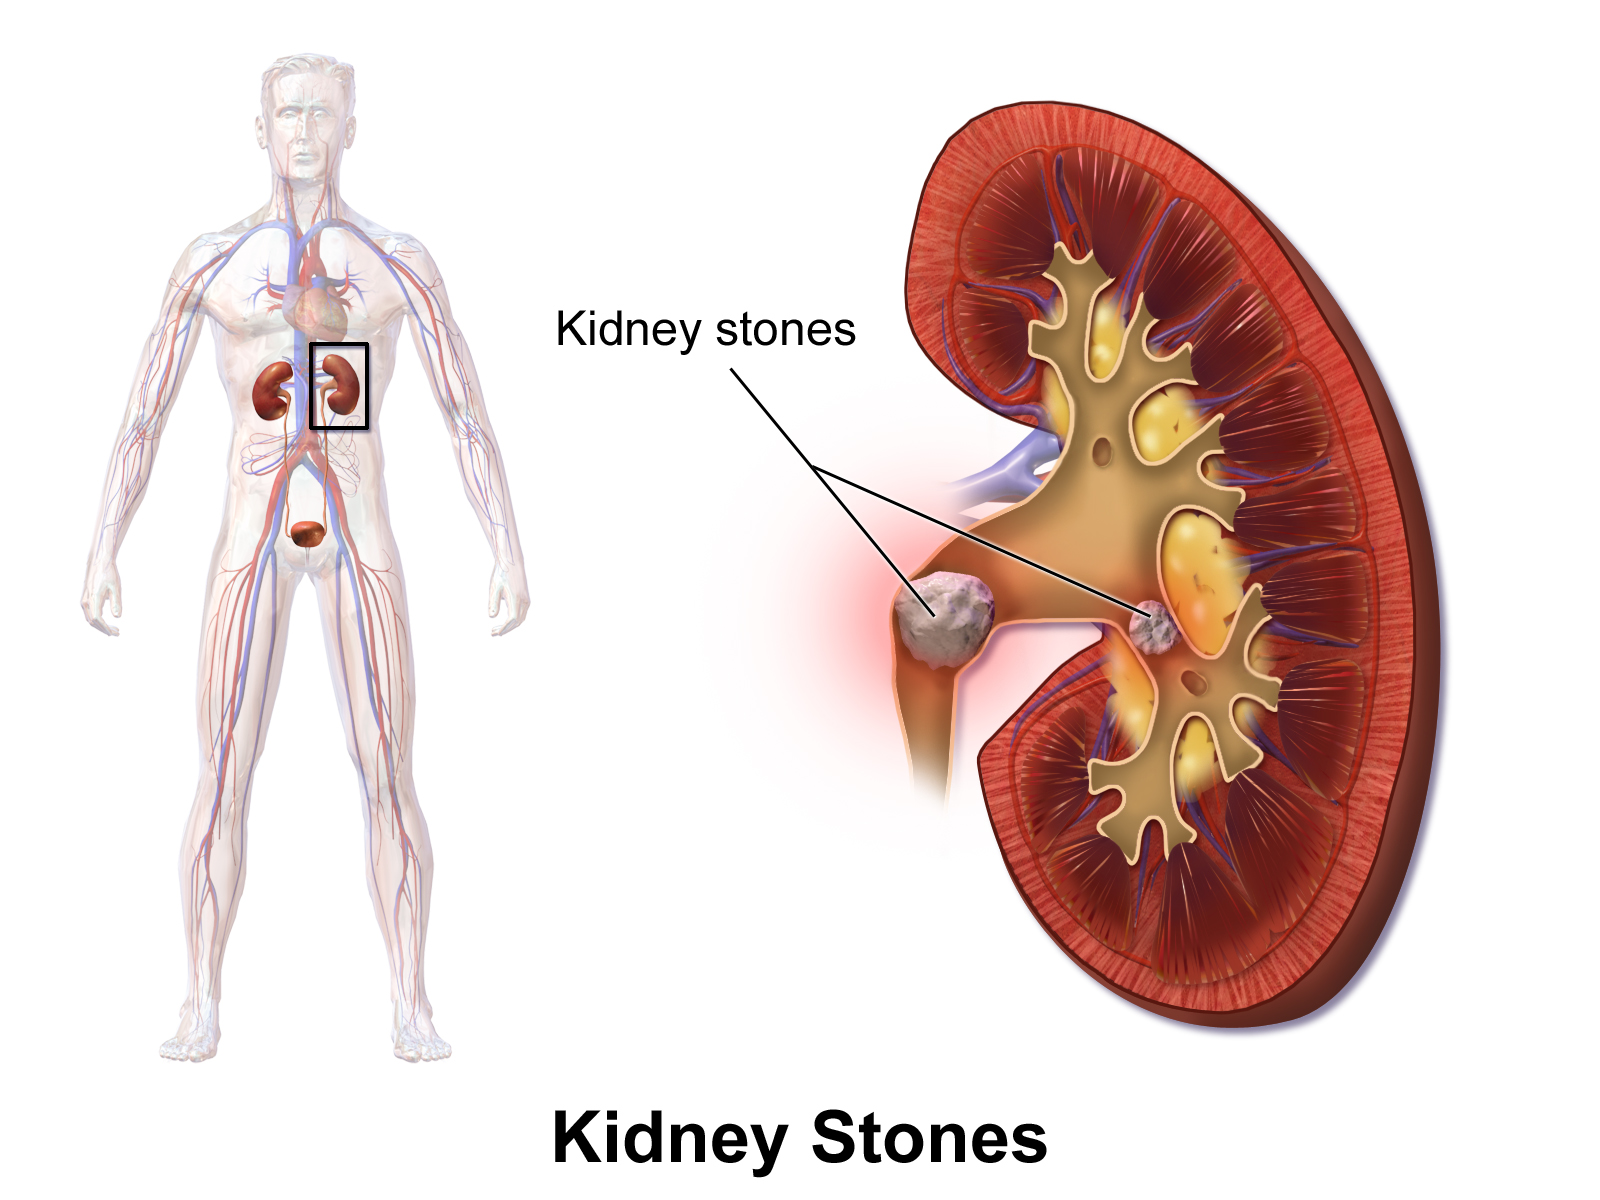 My brother once caught up with the pain of Kidney due to kidney stone. It was the first time I saw my elder brother screaming in the pain.